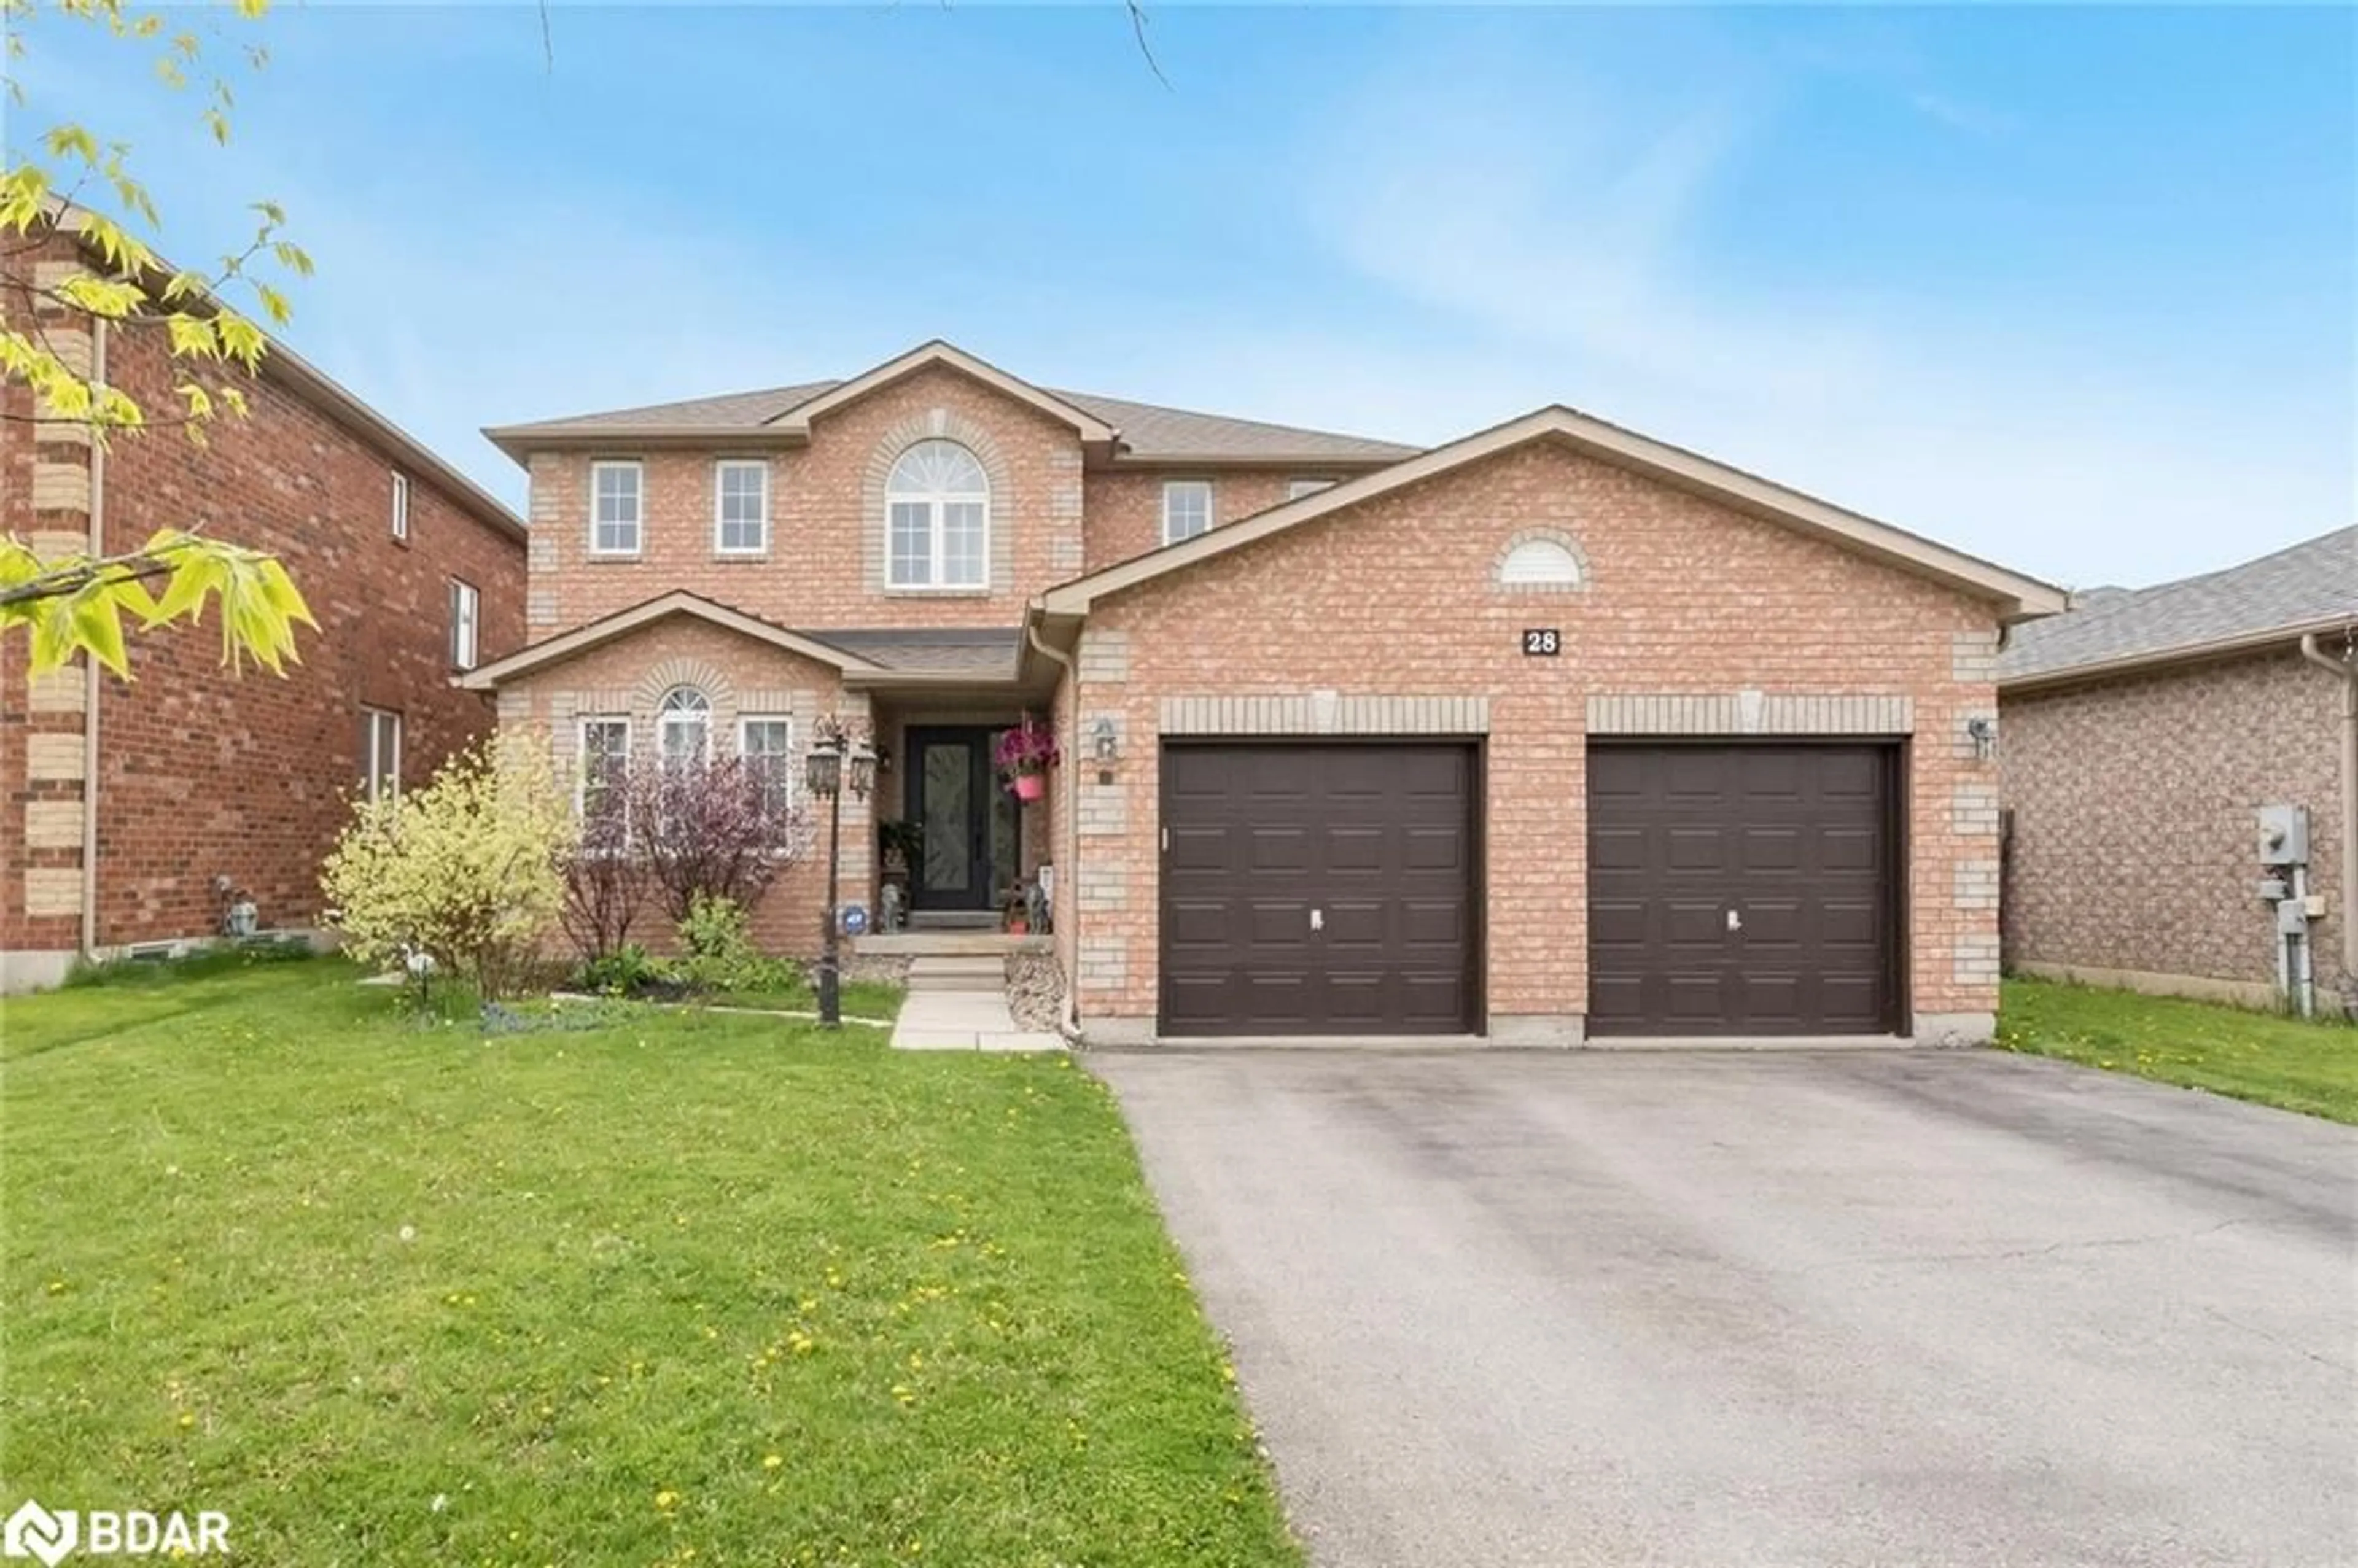 Home with brick exterior material for 28 Sun King Cres, Barrie Ontario L4M 7J9